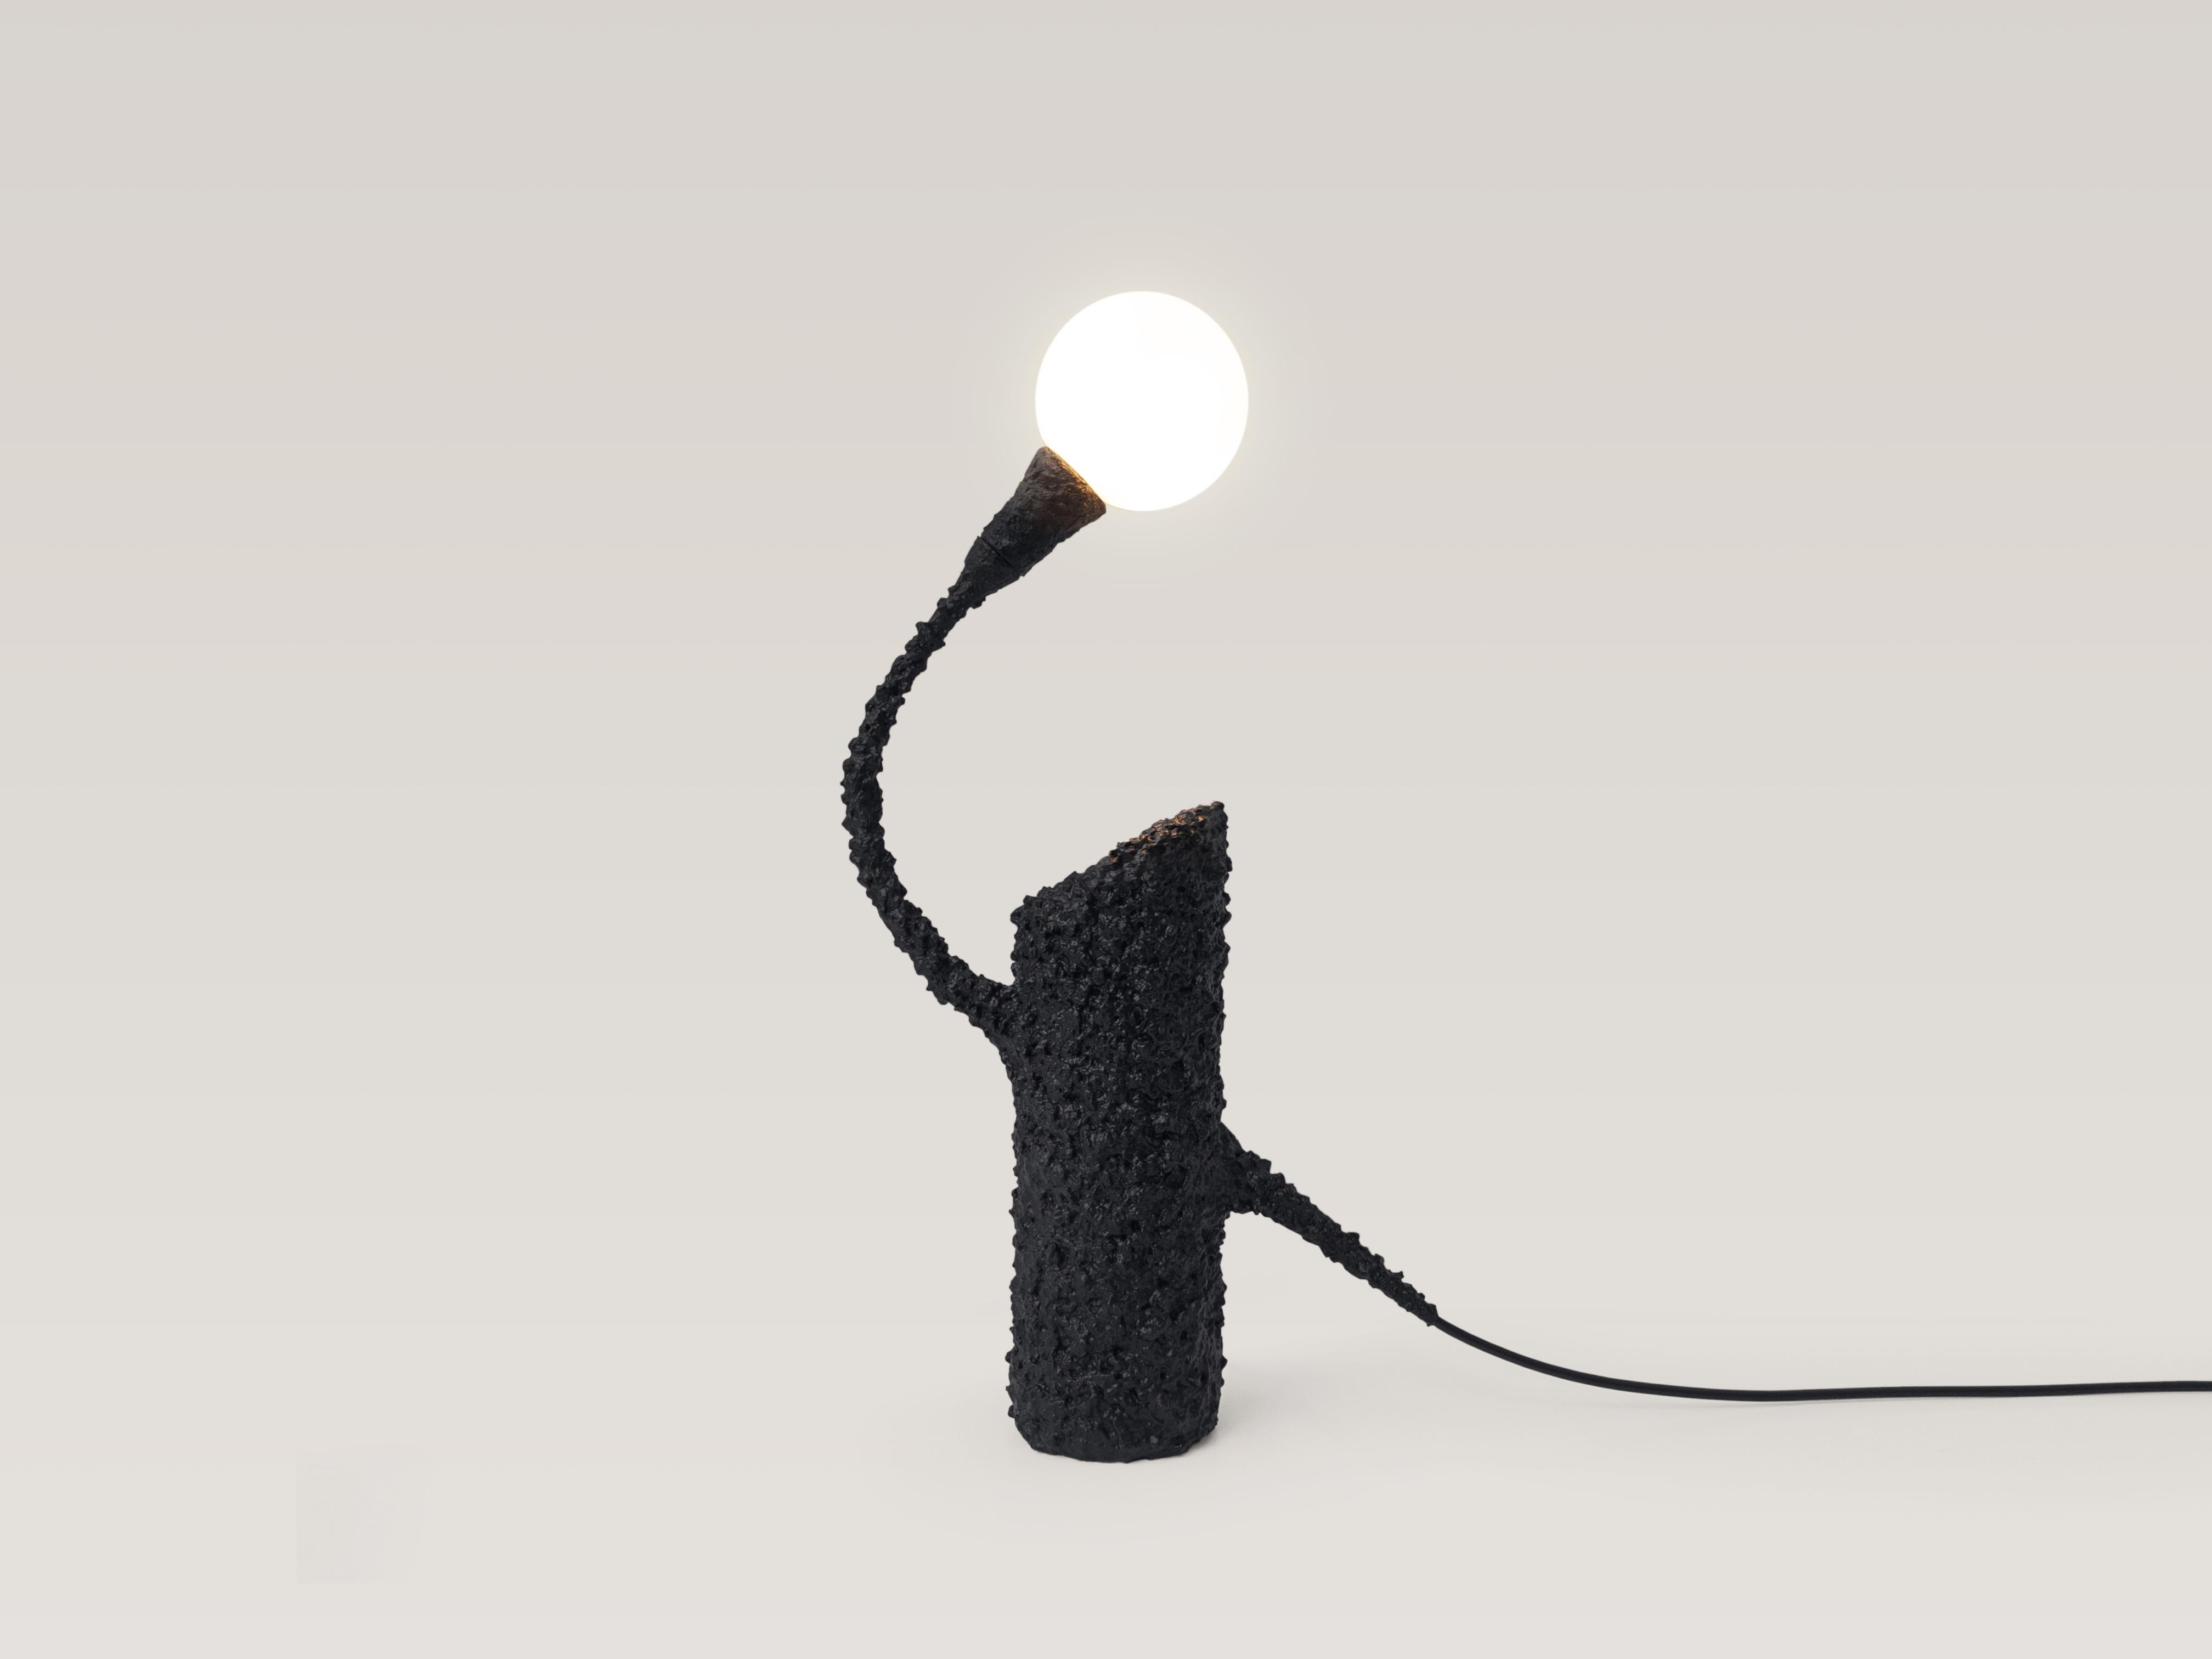 Infinity Dimmable Table Lamp.
Unique piece.

Material: cardboard, copper, wood, foam, PVA, sand, acrylic paint, spray paint, polyurethane, electrical components, dimmable LED bulb.